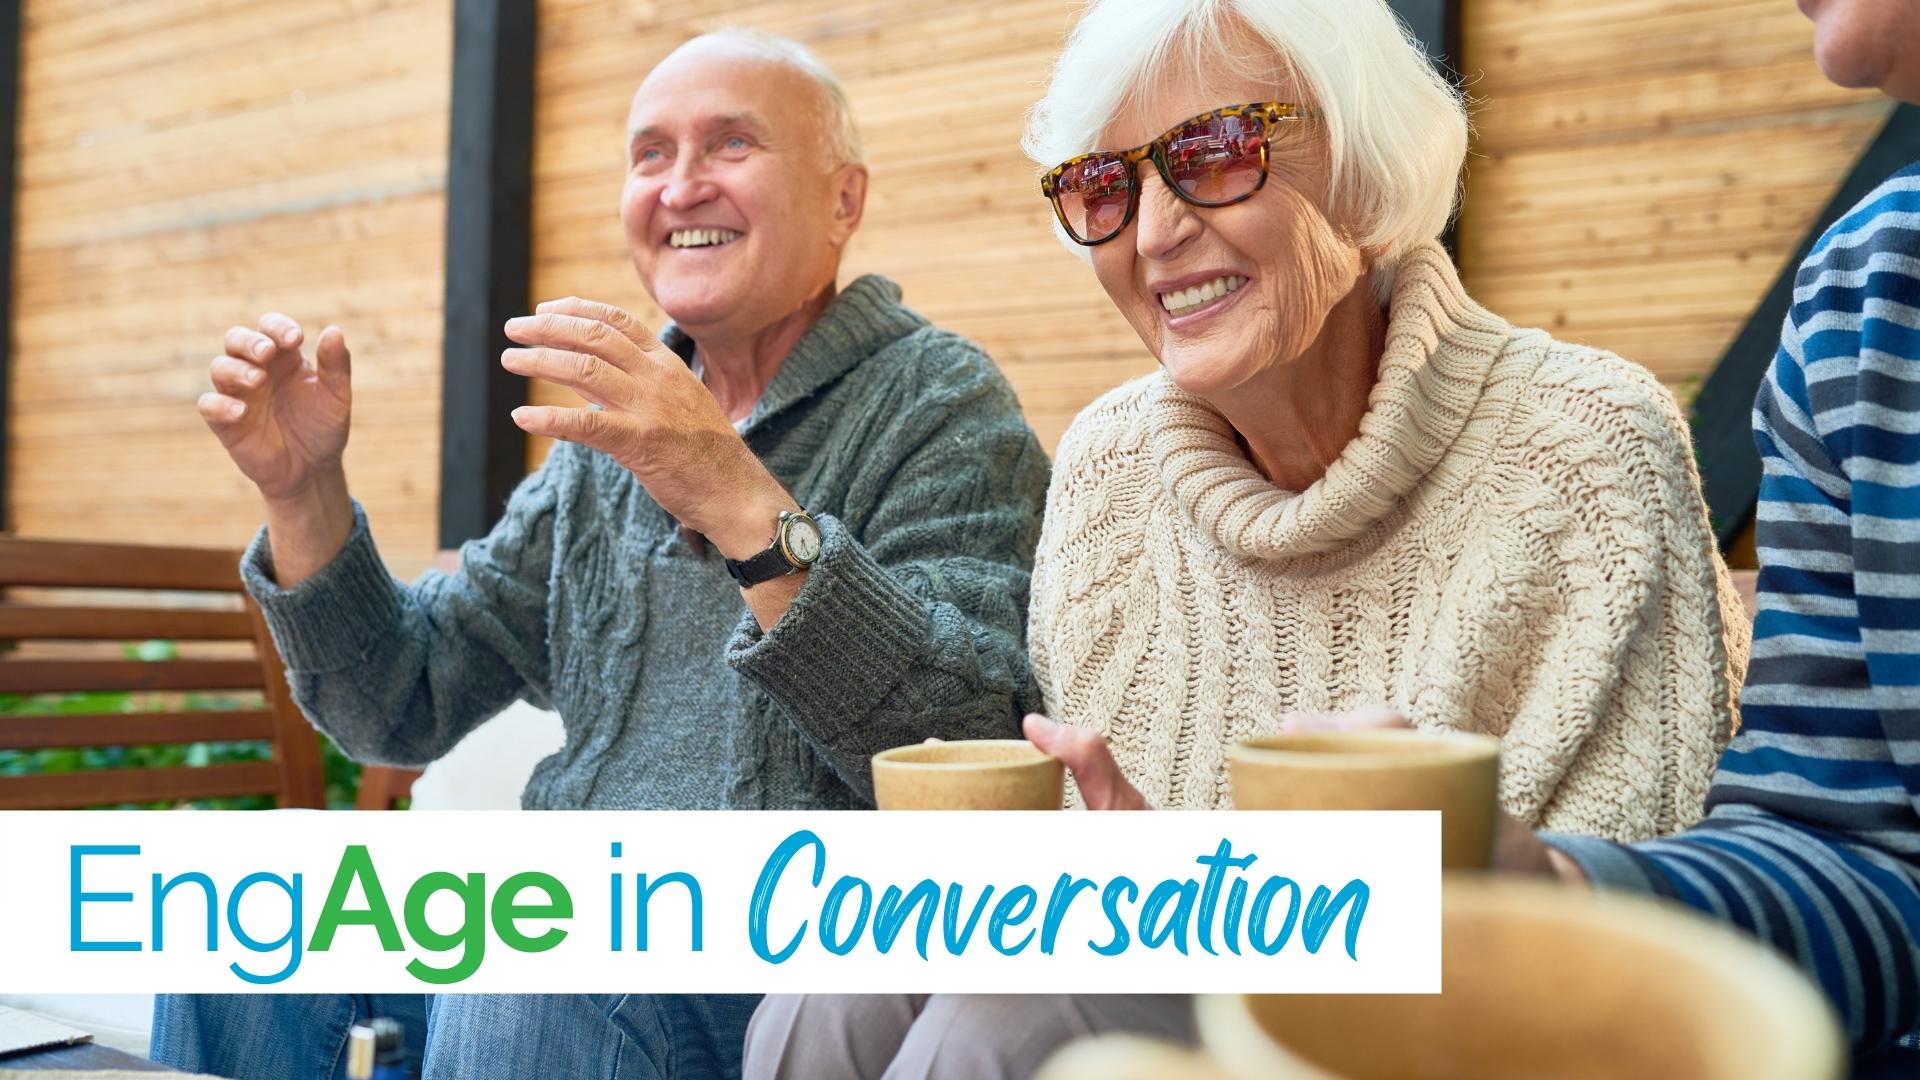 EngAge in Conversation Series Announces “Road Map to the Future” Webinar